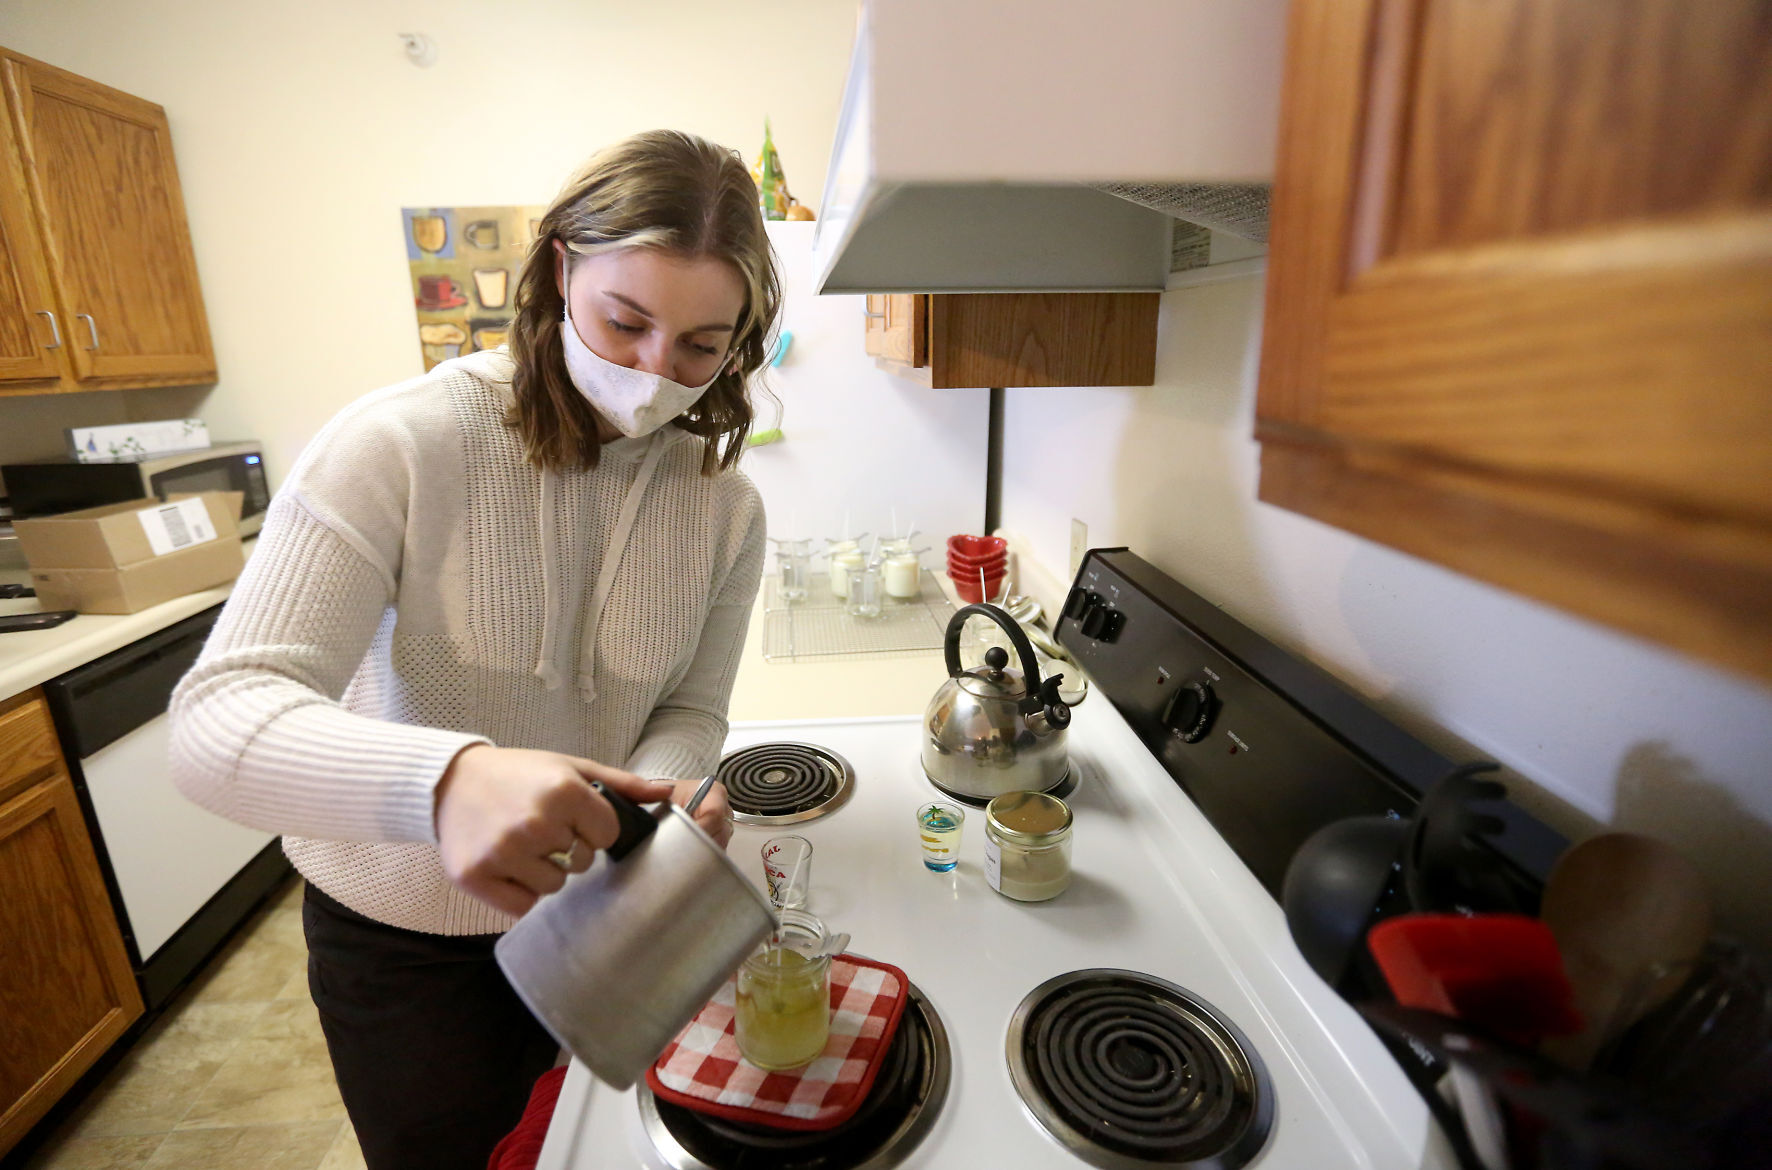 Ali Smith, owner of Ali J. Candles, pours a mixture into jars while making candles at her apartment in Platteville, Wis., on Wednesday, Dec. 30, 2020. PHOTO CREDIT: JESSICA REILLY